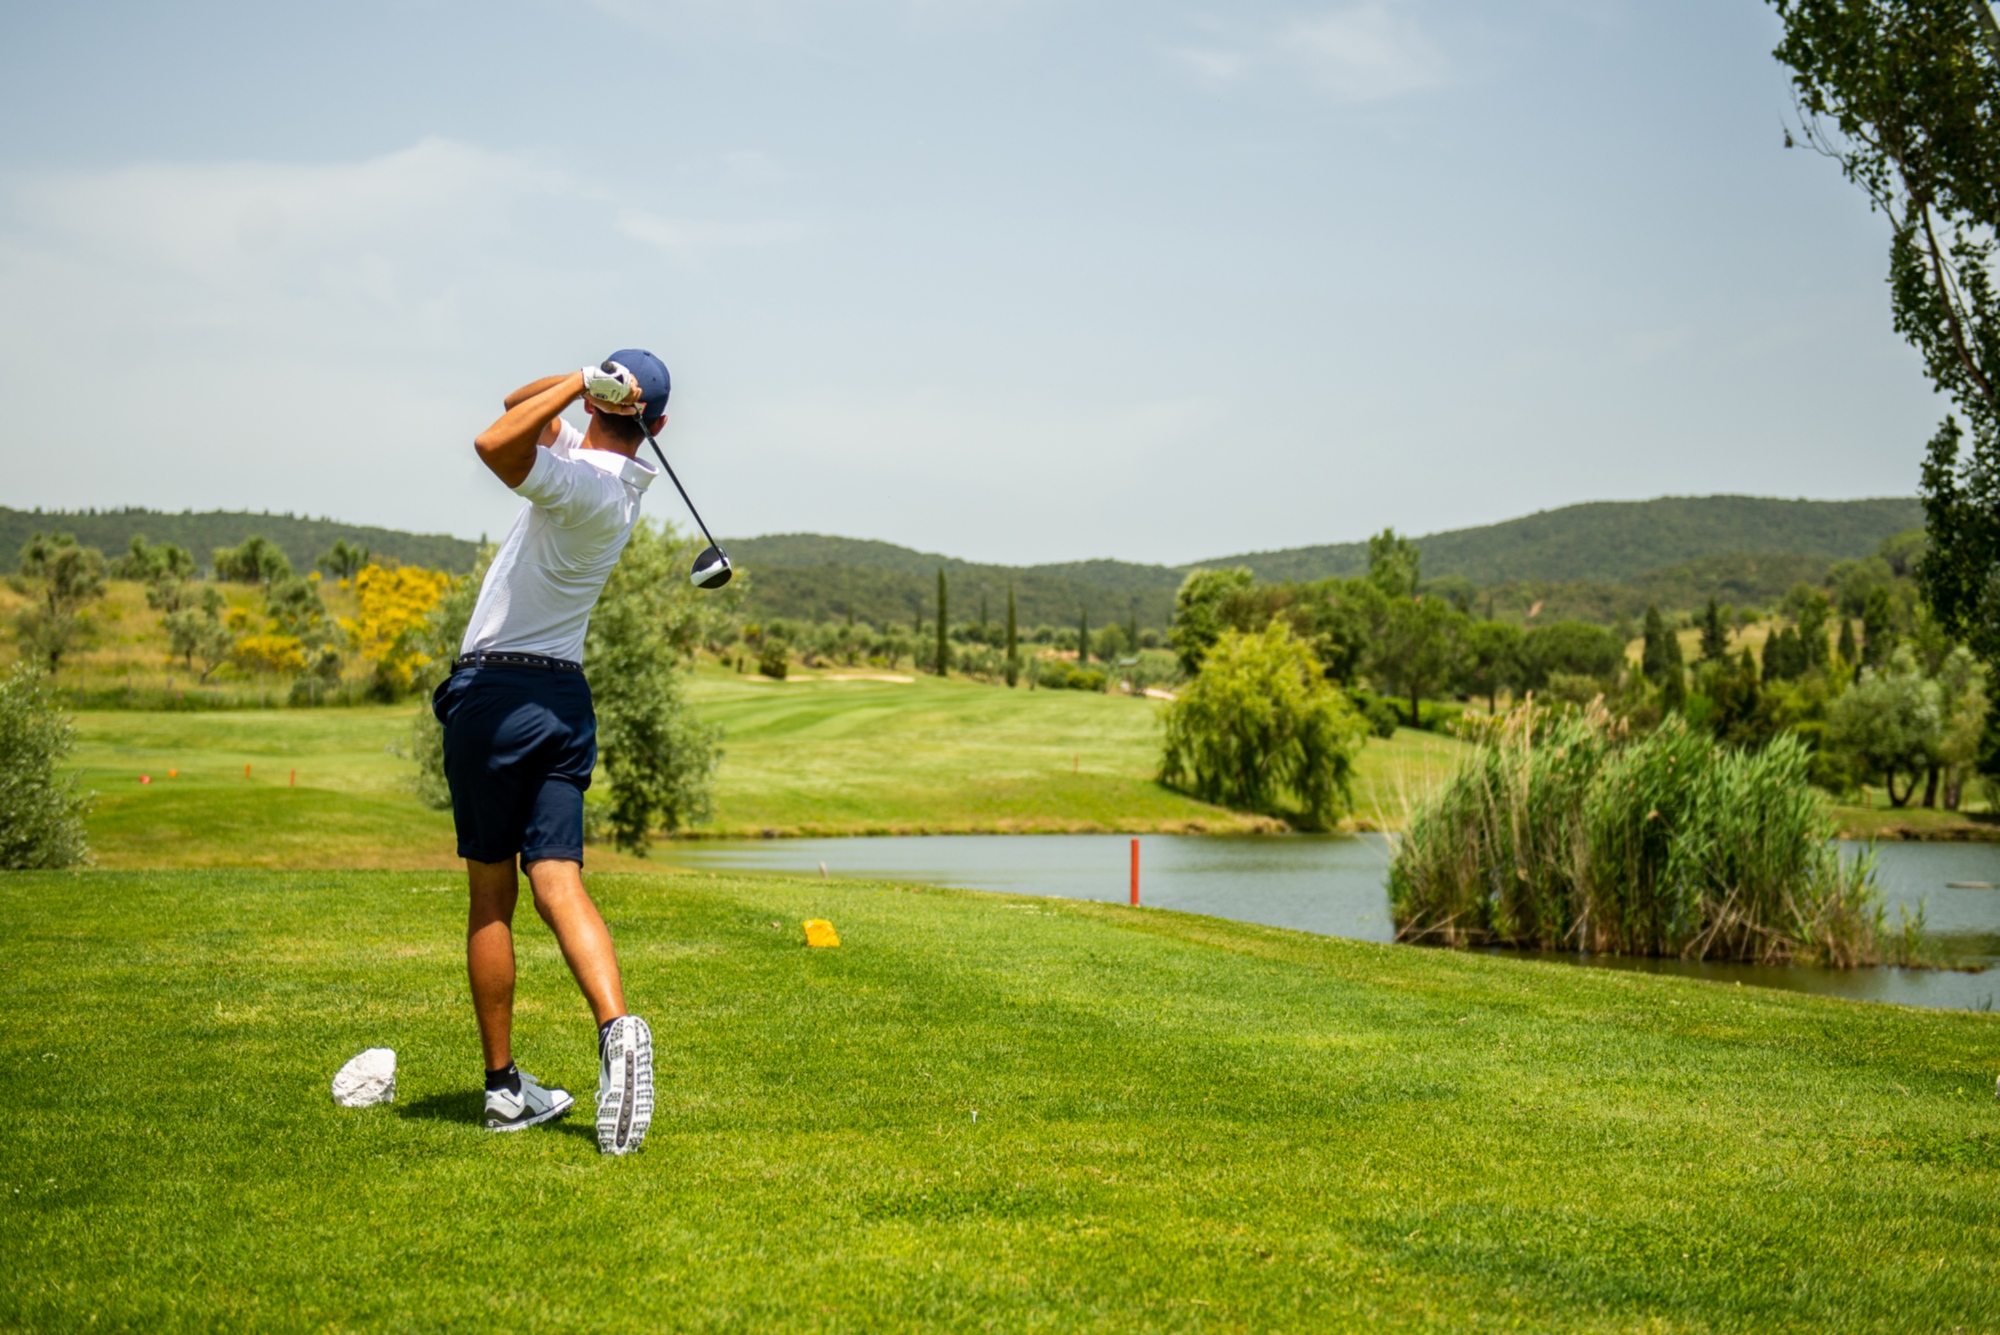 Giocare a golf in Toscana